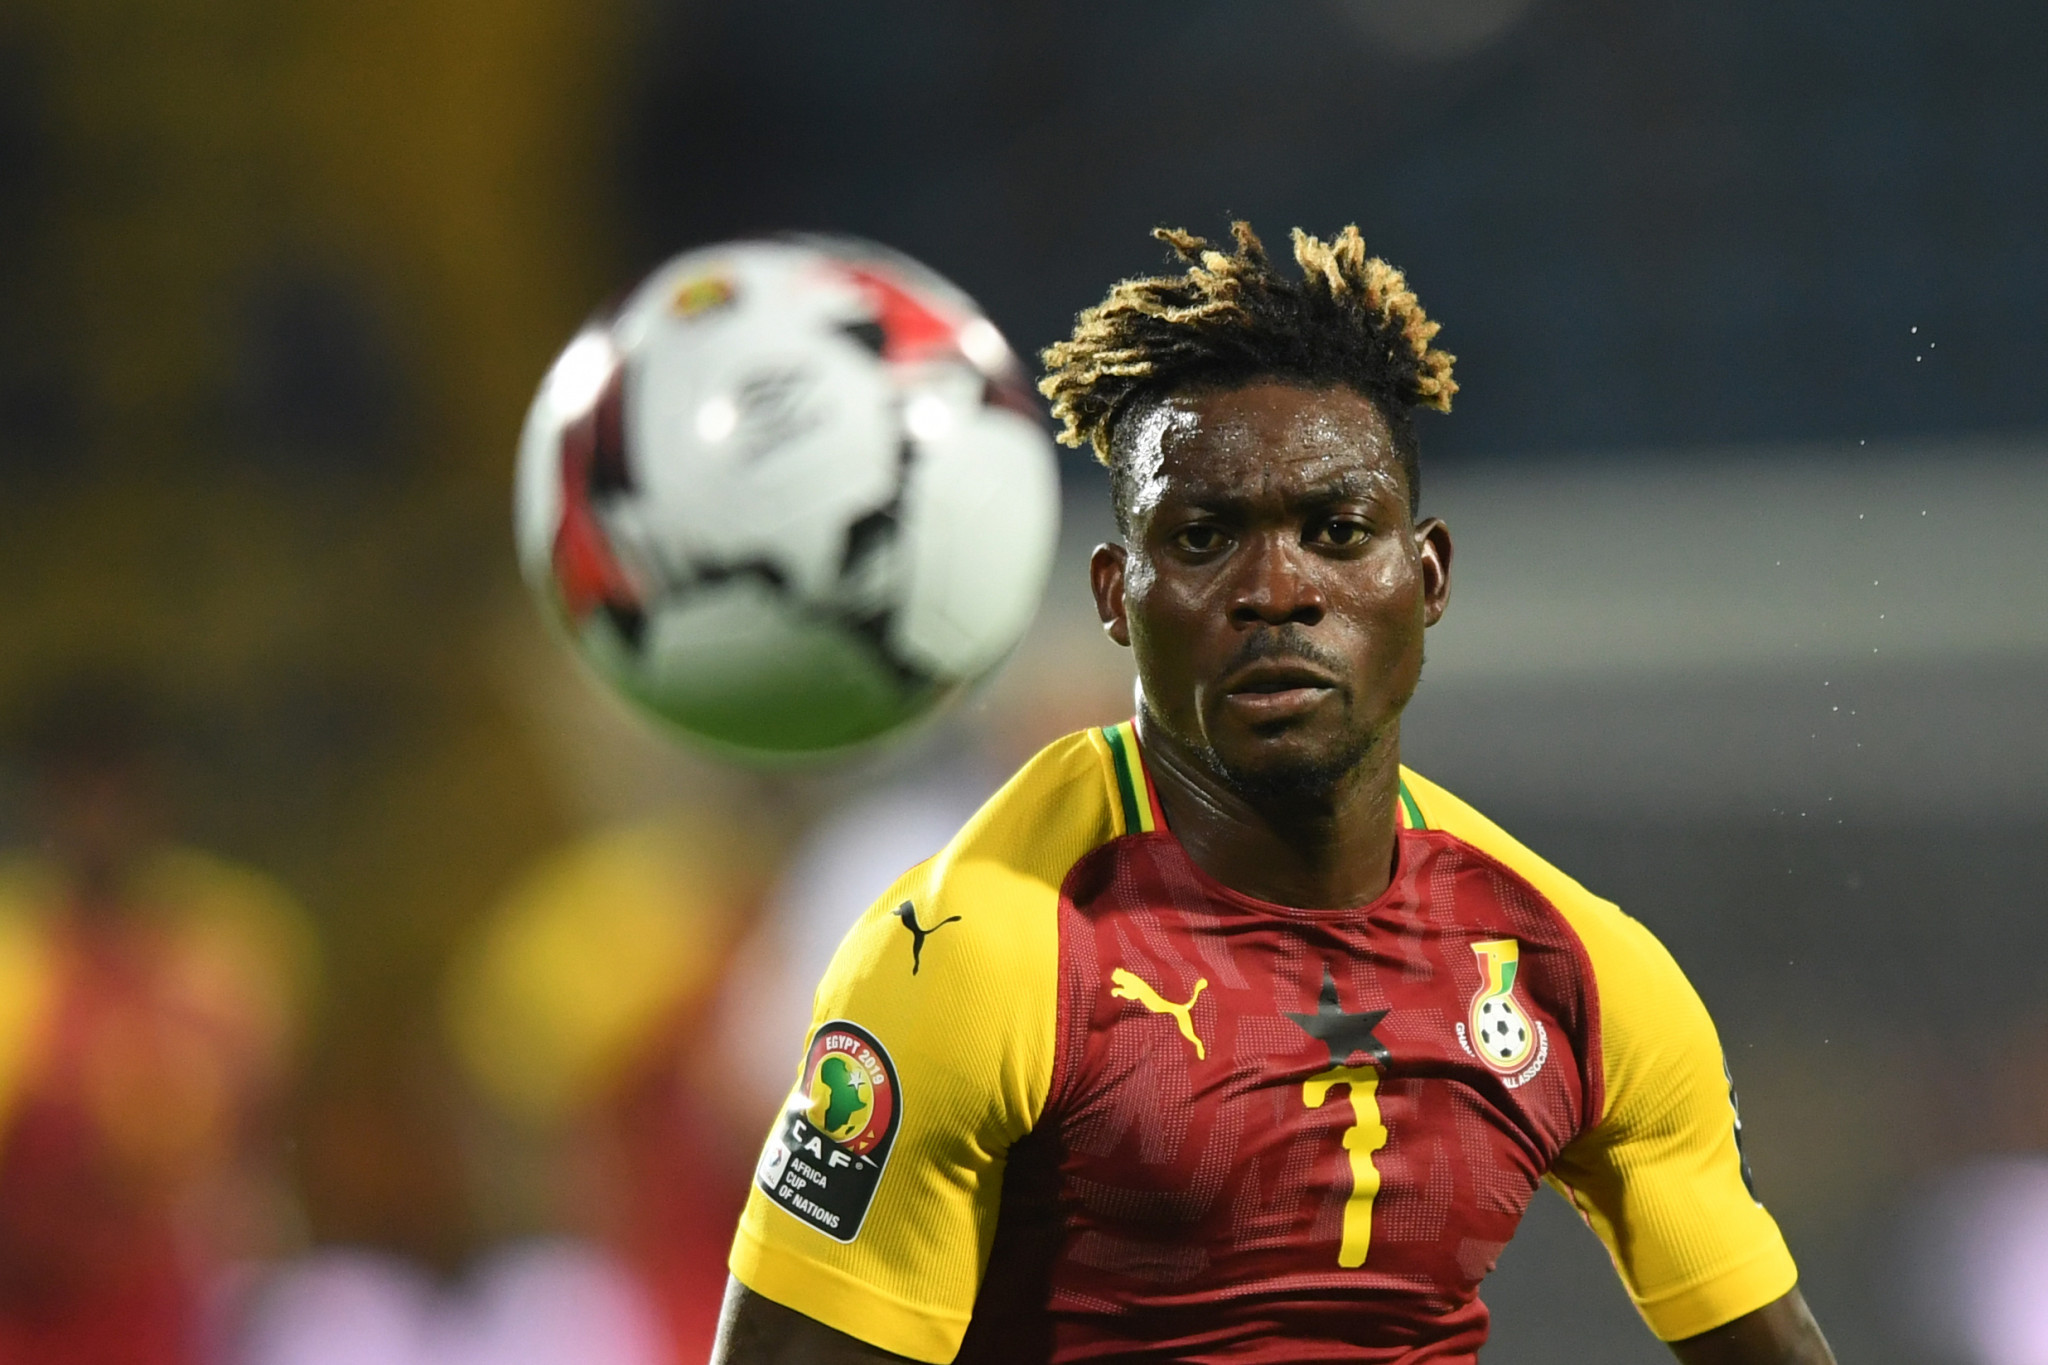 Former Premier League footballer Christian Atsu, who played for Ghana at the 2014 FIFA World Cup, has been found dead after the earthquake in Turkey and Syria ©Getty Images